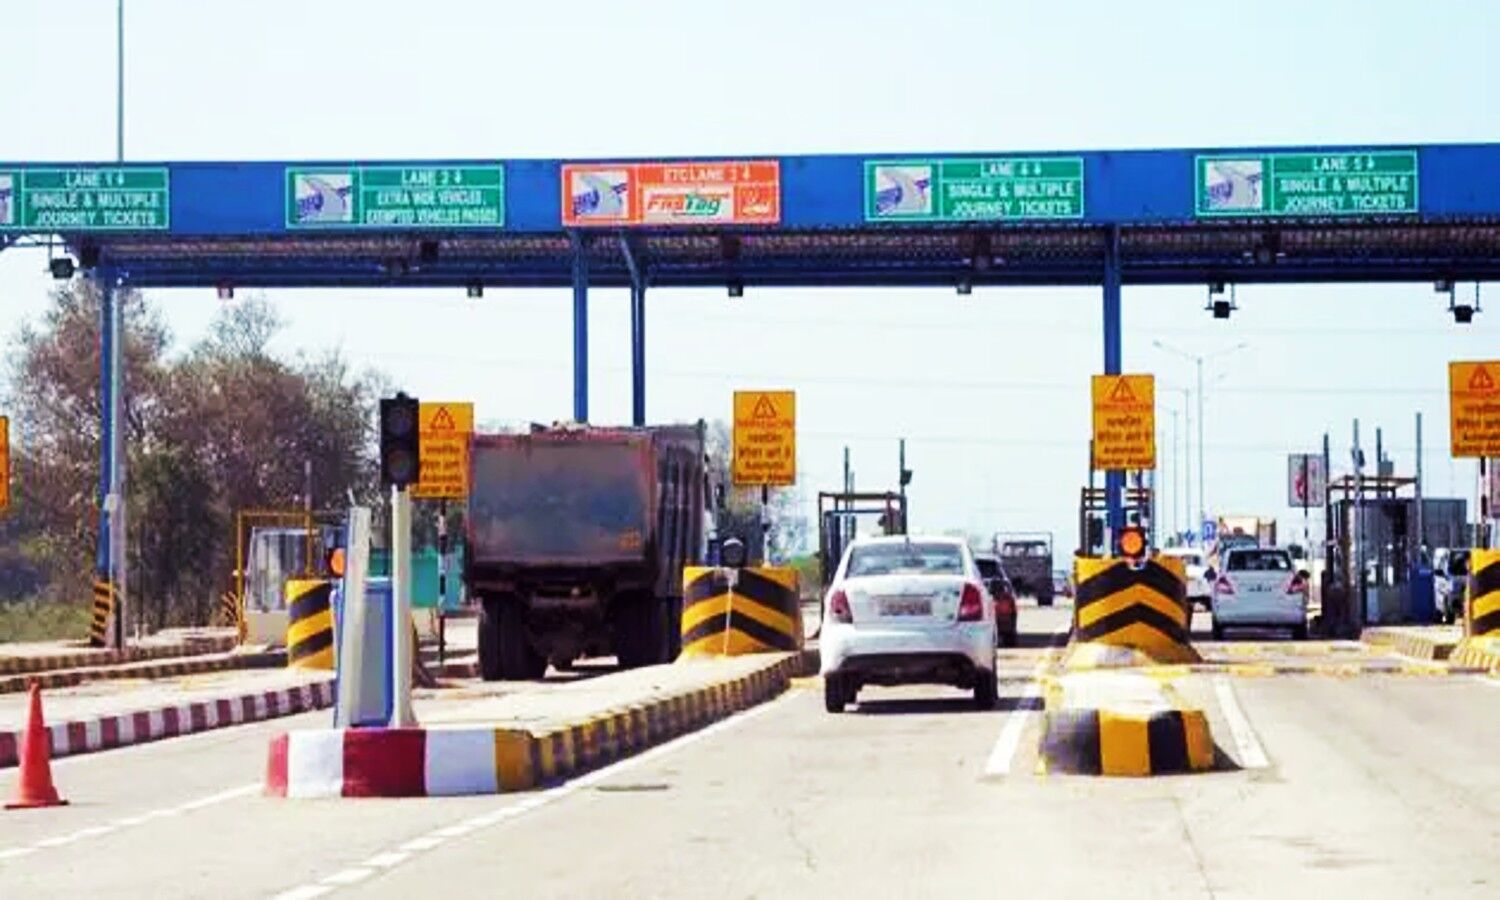 New Toll System in India: Now the toll of the vehicles on the highway will be deducted automatically, the GPS toll system has arrived